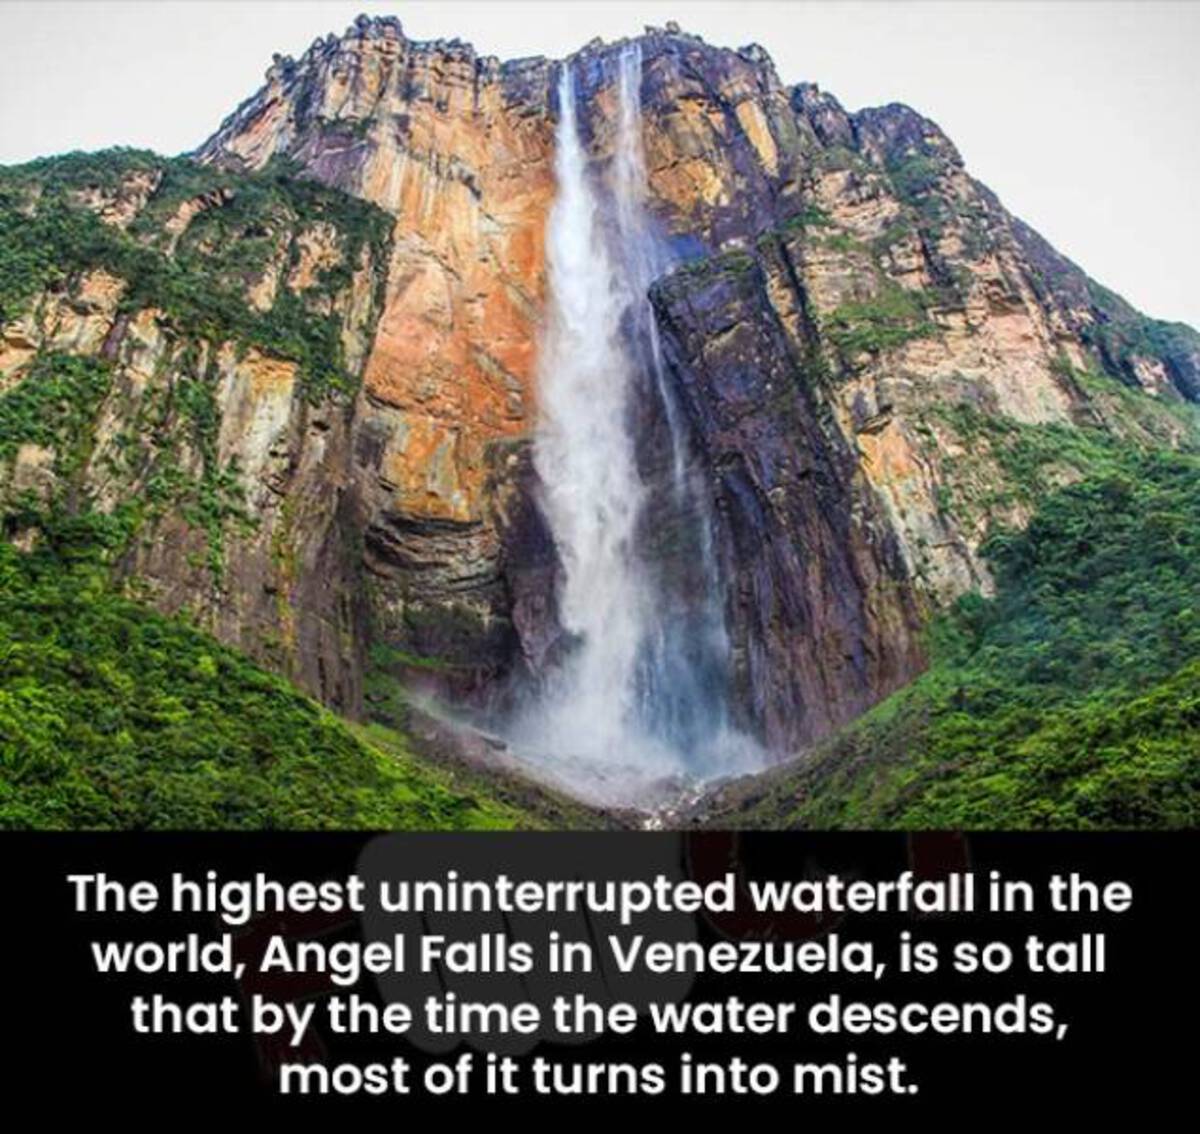 The highest uninterrupted waterfall in the world, Angel Falls in Venezuela, is so tall that by the time the water descends, most of it turns into mist.